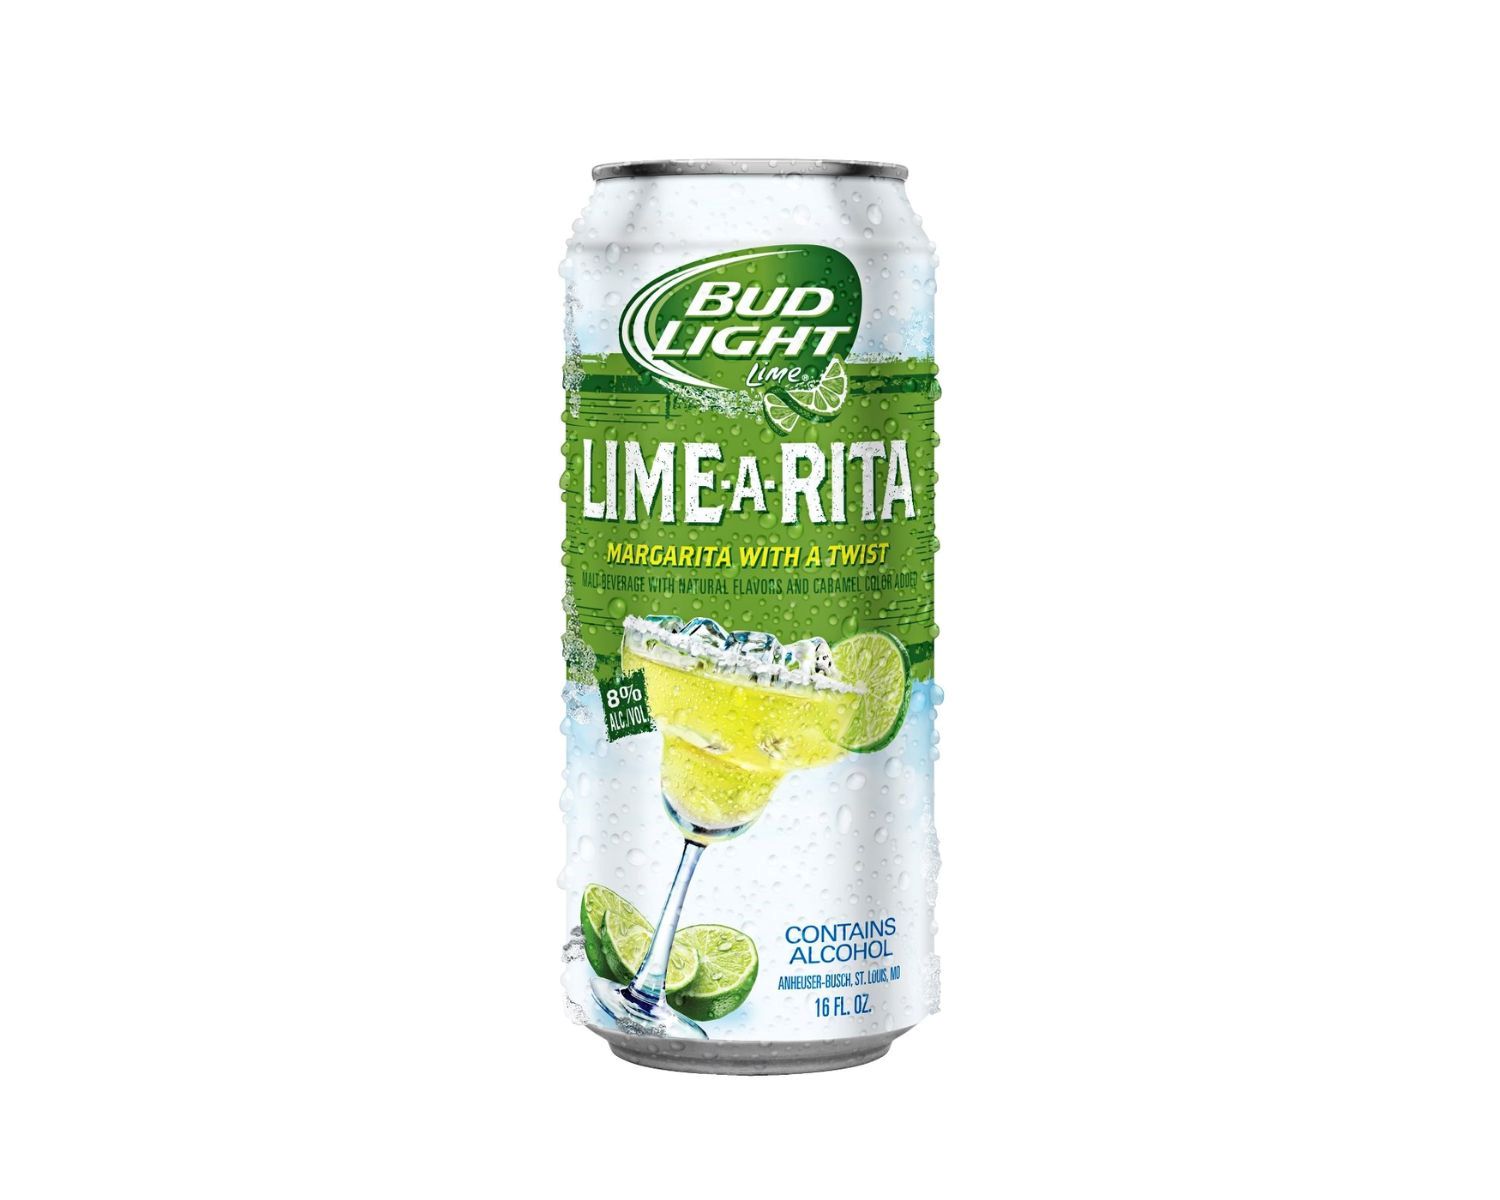 15-bud-light-lime-a-rita-nutrition-facts